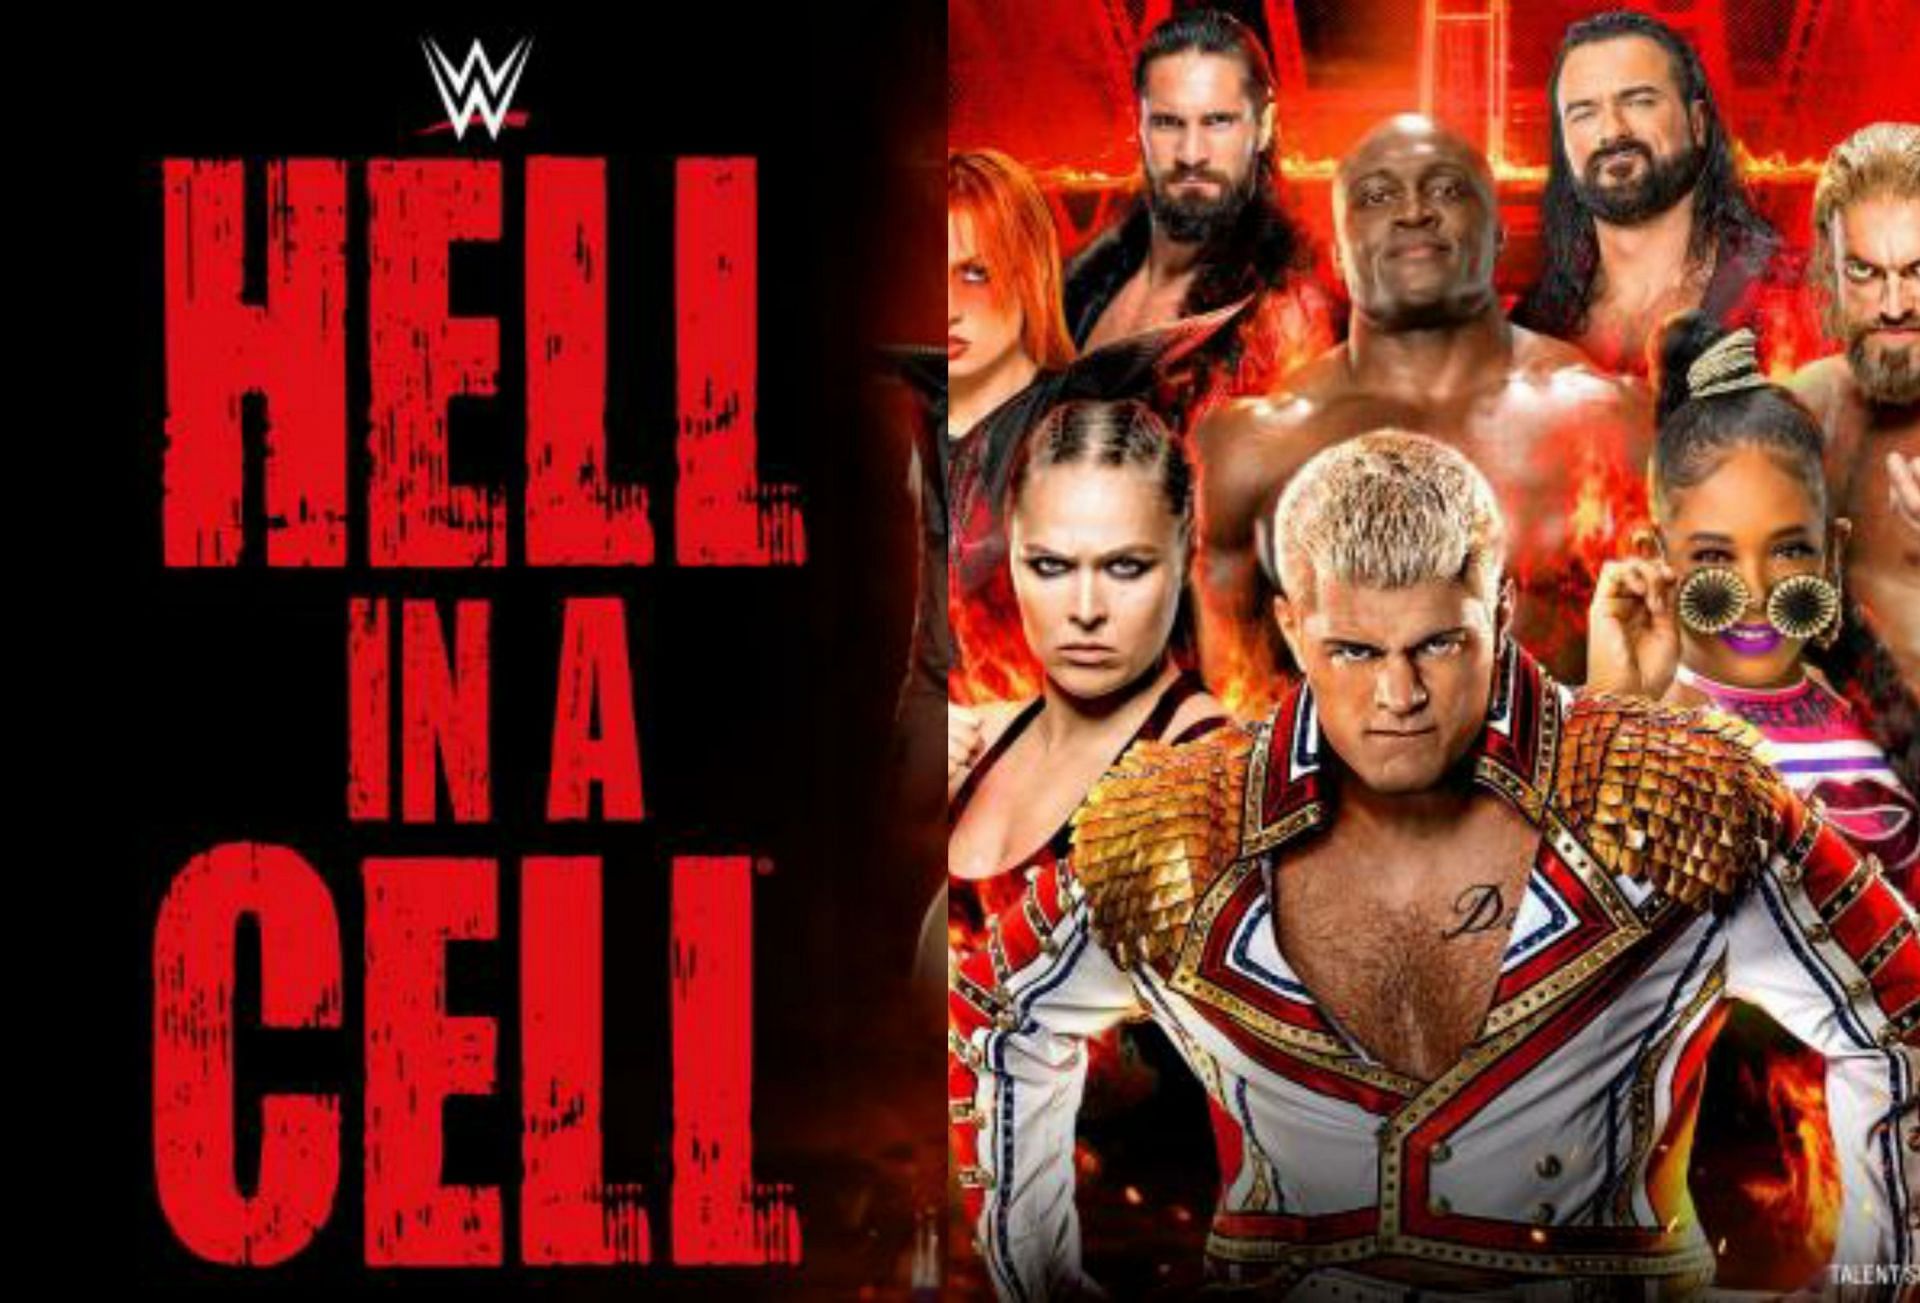 Hell in a Cell is scheduled for June 5, 2022